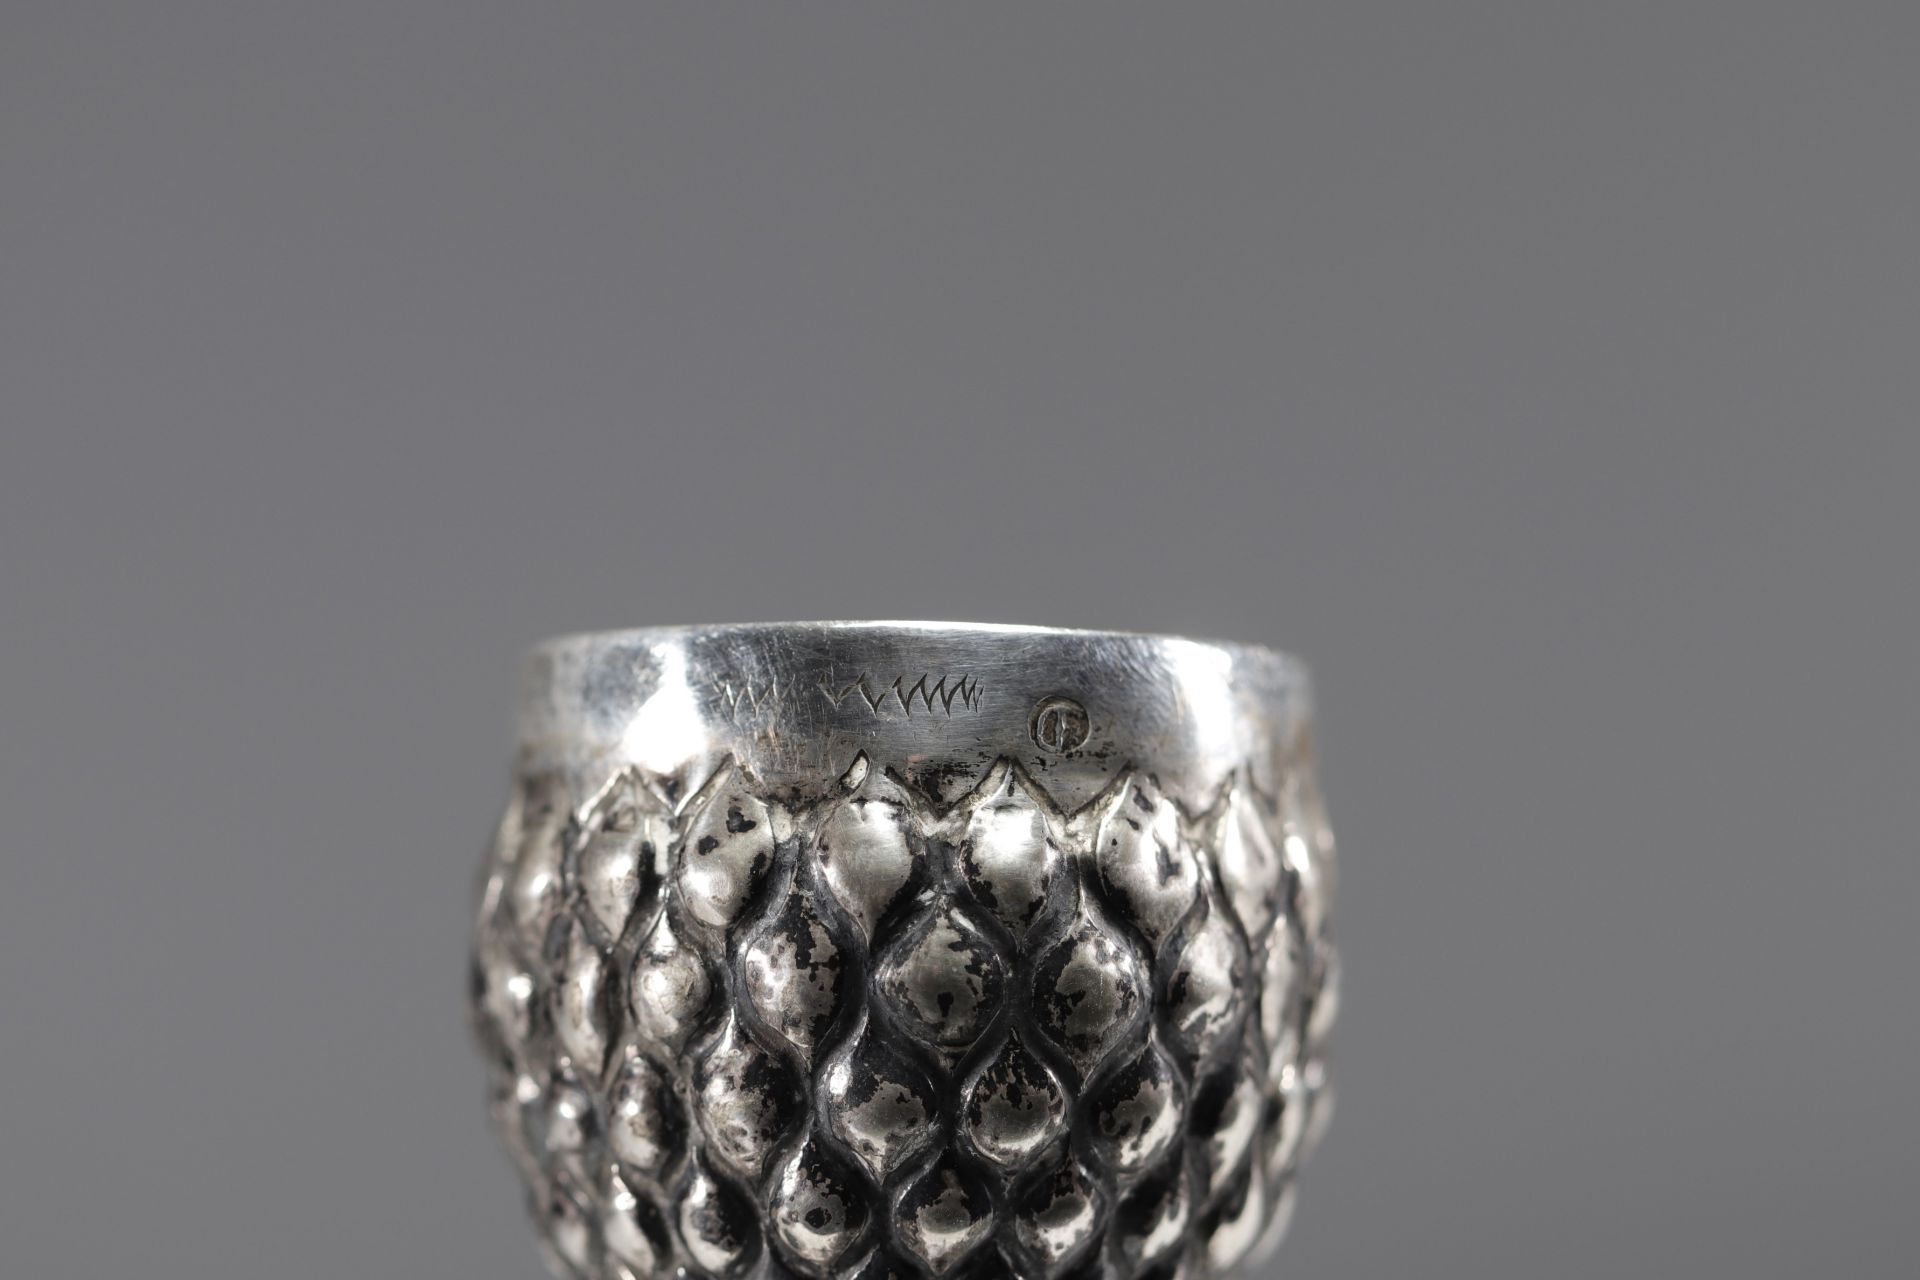 Covered hanap with pineapple-shaped lid in solid silver Nuremberg pewter from 17th centuryÂ - Image 4 of 4